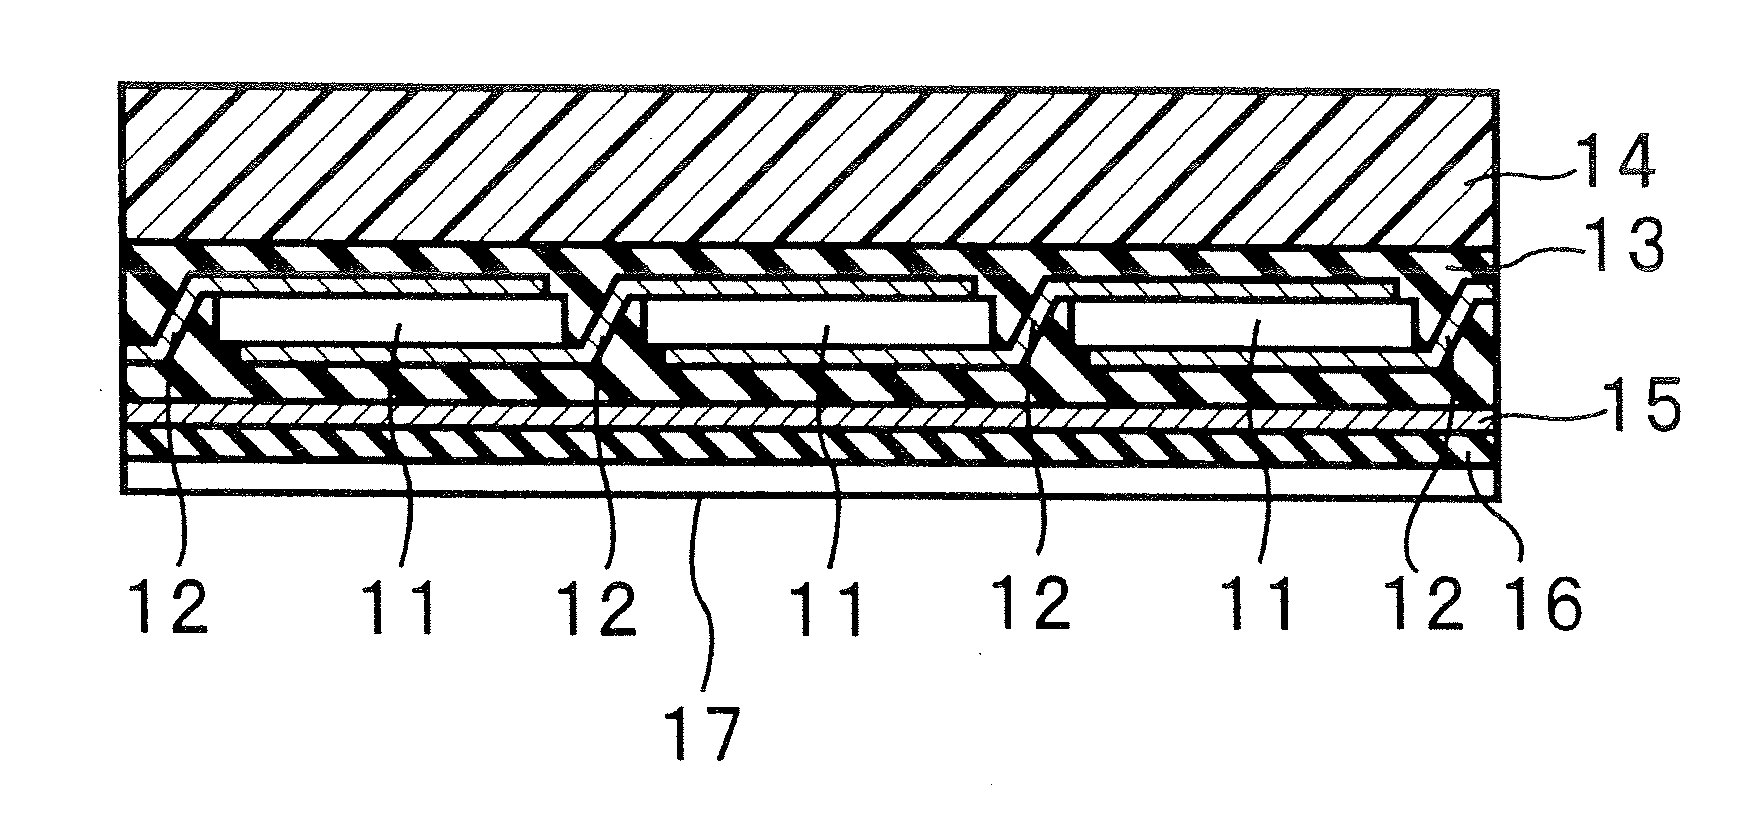 Photovoltaic element and fabrication method thereof